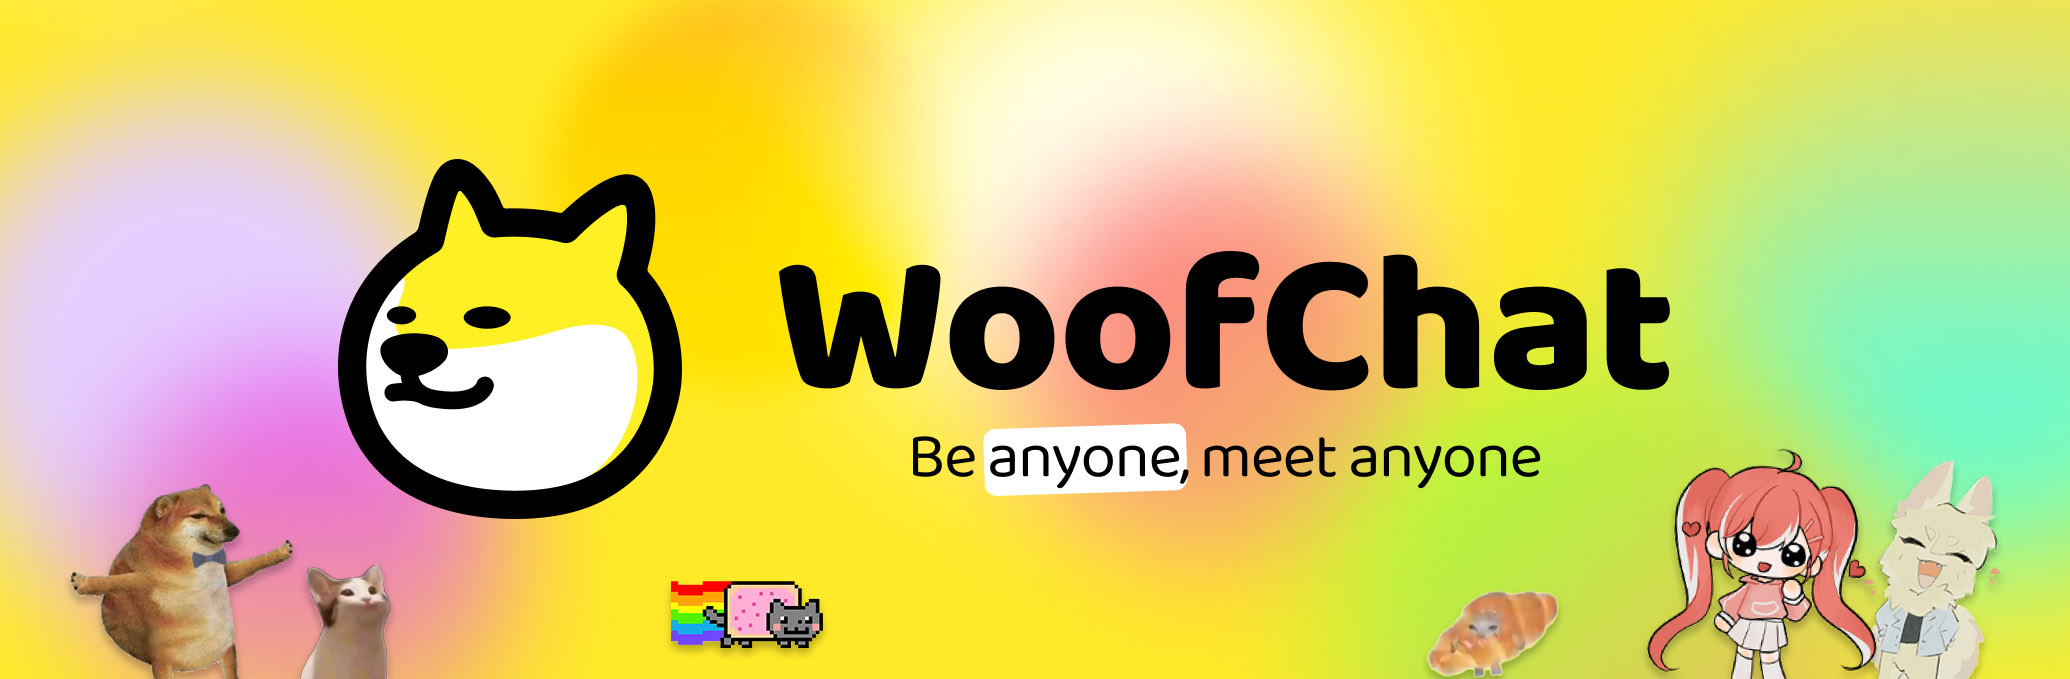 WoofChat - Chat Together With Any Character